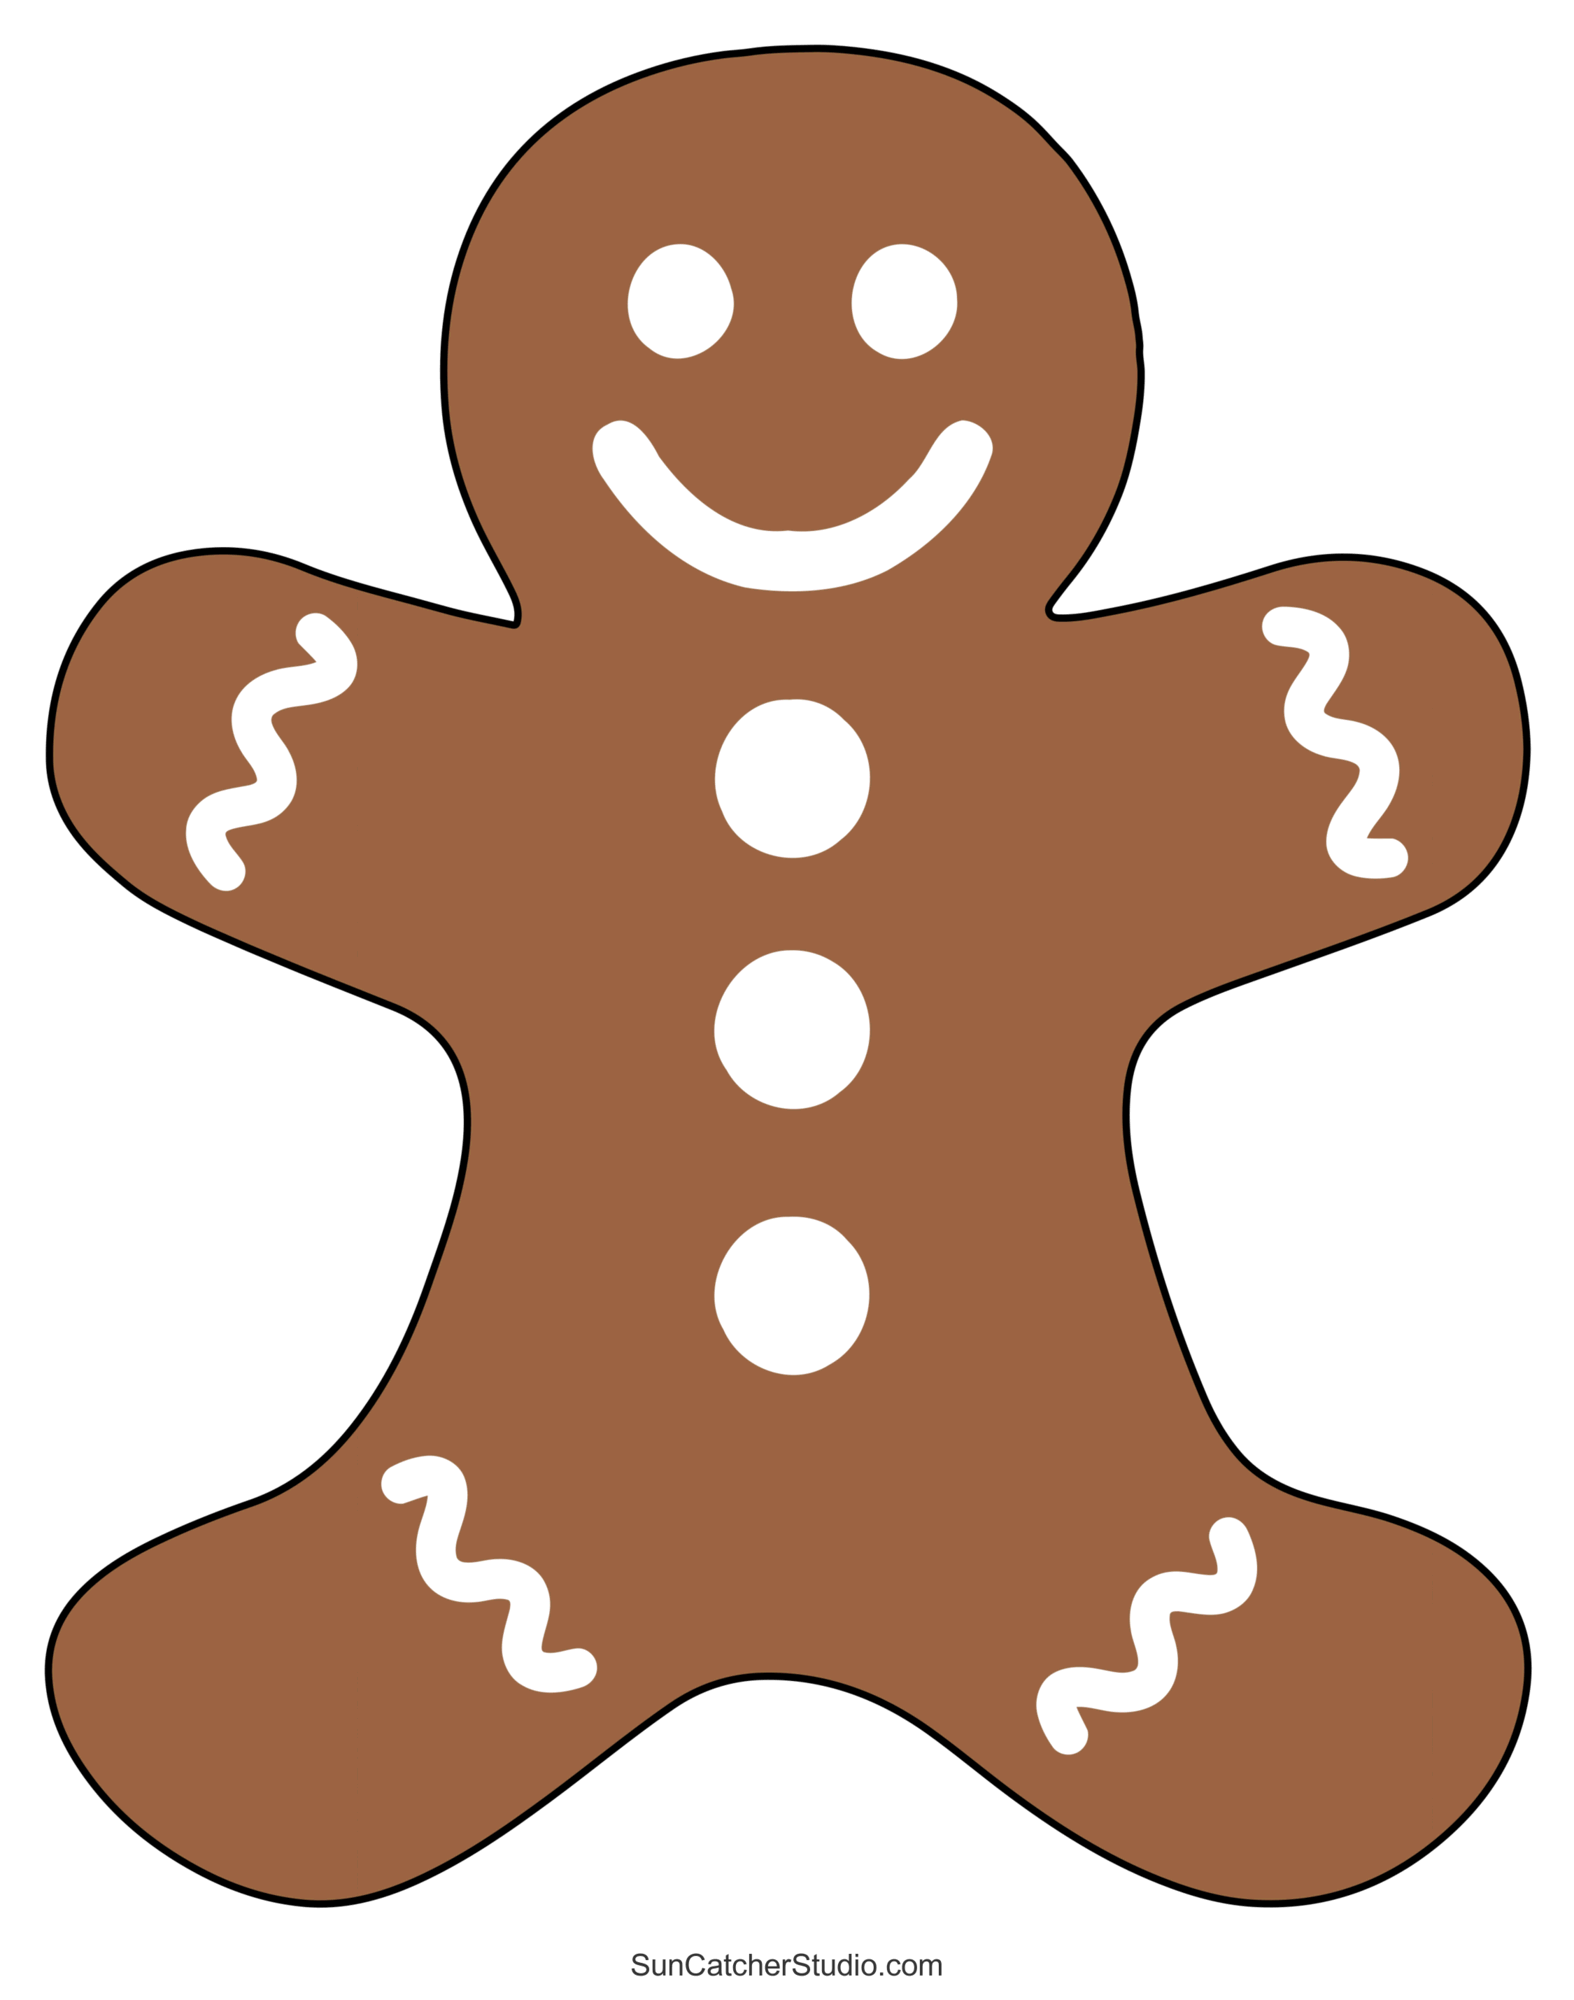 Gingerbread man templates printable outlines and patterns â diy projects patterns monograms designs templates